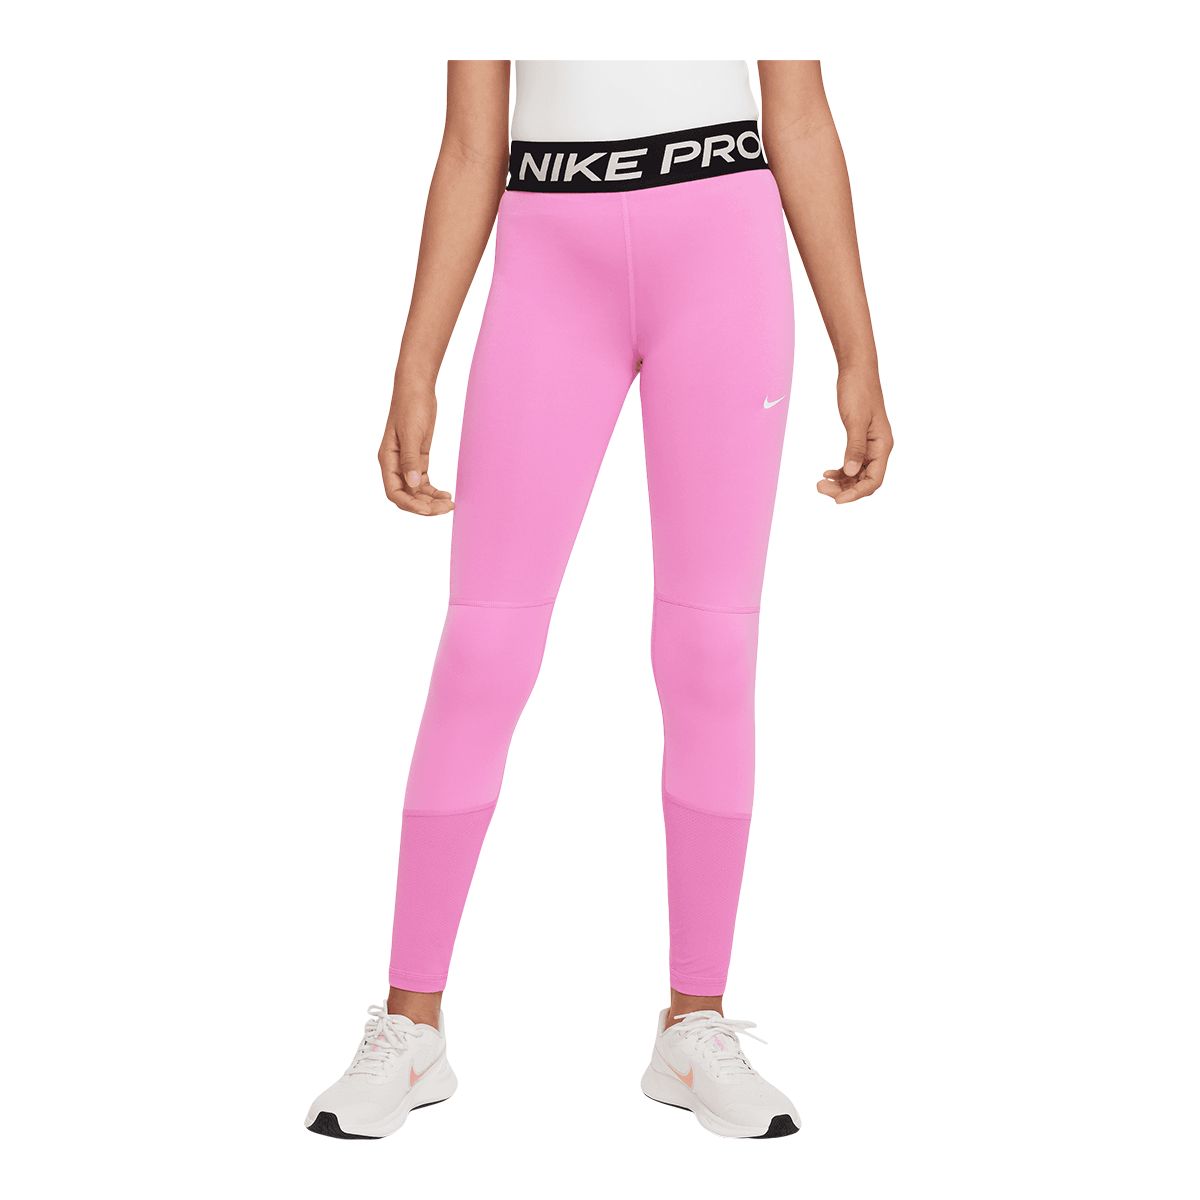 https://media-www.sportchek.ca/product/div-03-softgoods/dpt-72-casual-clothing/sdpt-04-girls/334159998/nike-nike-pro-legging-playful-pink-q323--63f85abd-7ae2-4747-99a2-7199deb1e984-jpgrendition.jpg?imdensity=1&imwidth=1244&impolicy=mZoom